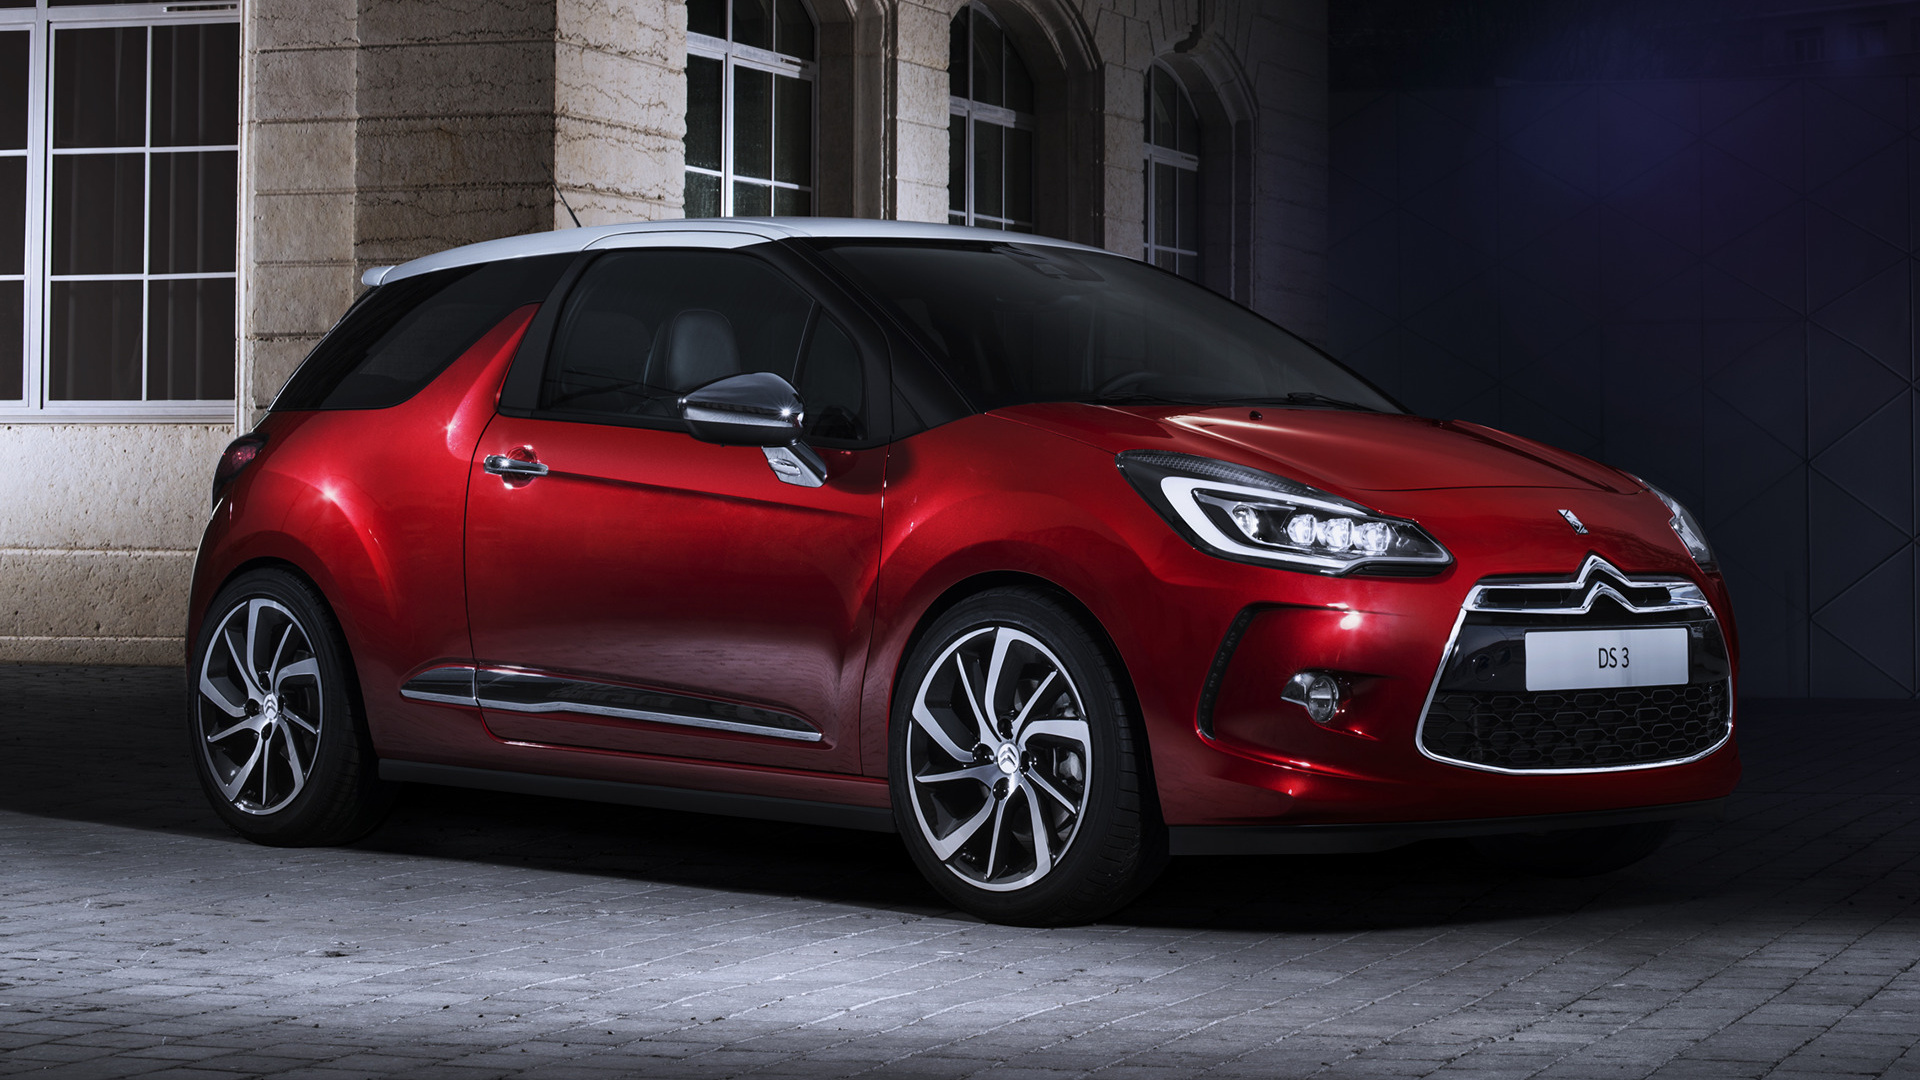 Citroen DS3 and HD Image